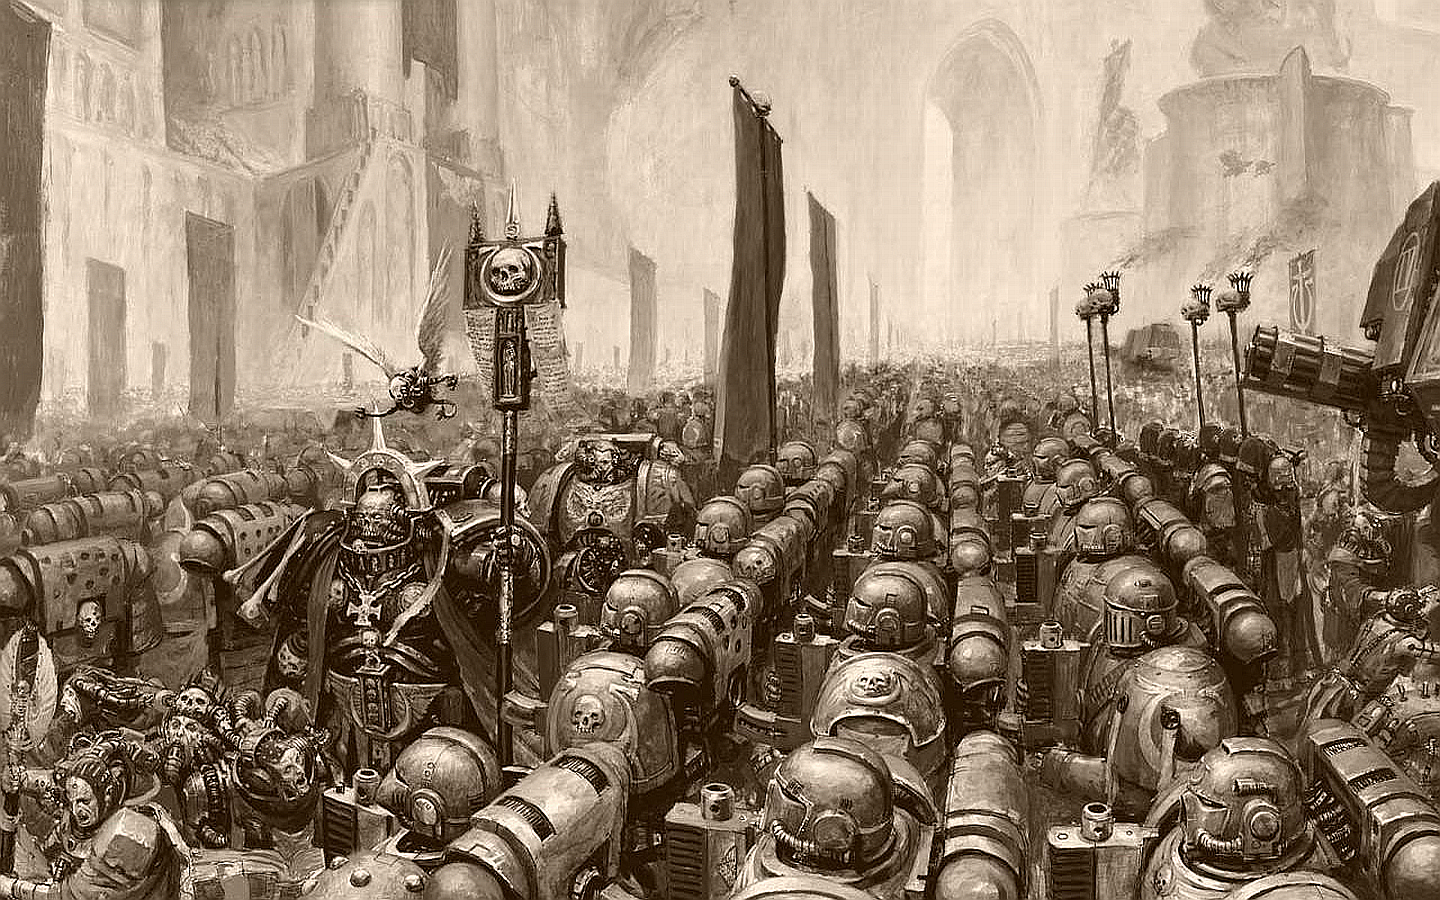 The Ultramarines chapter of the Adeptus Astartes on review. Created by (I believe) Alex Boyd (if this credit is incorrect, please let me know.